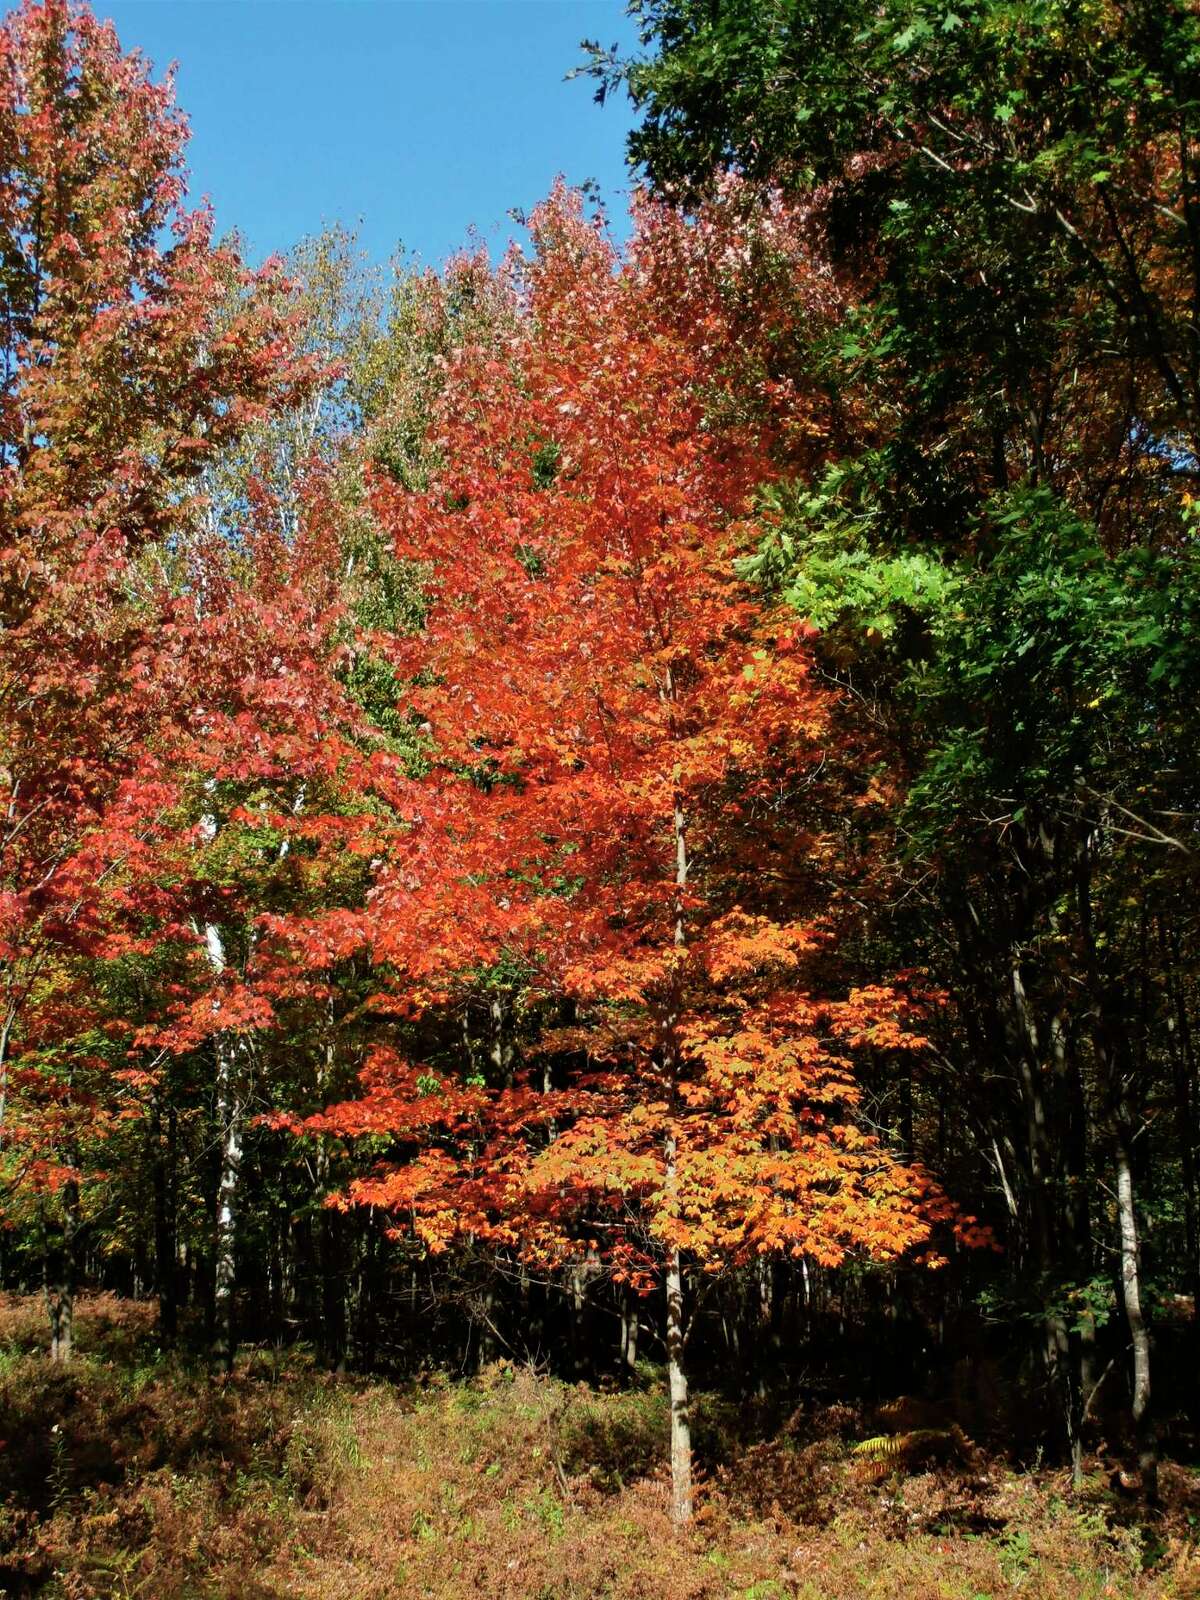 Guests will explore forests with maple, birch and aspen trees as well as meadows and prairies on a nature walk on Oct. 10 at McLean Nature Preserve. (Photo provided)